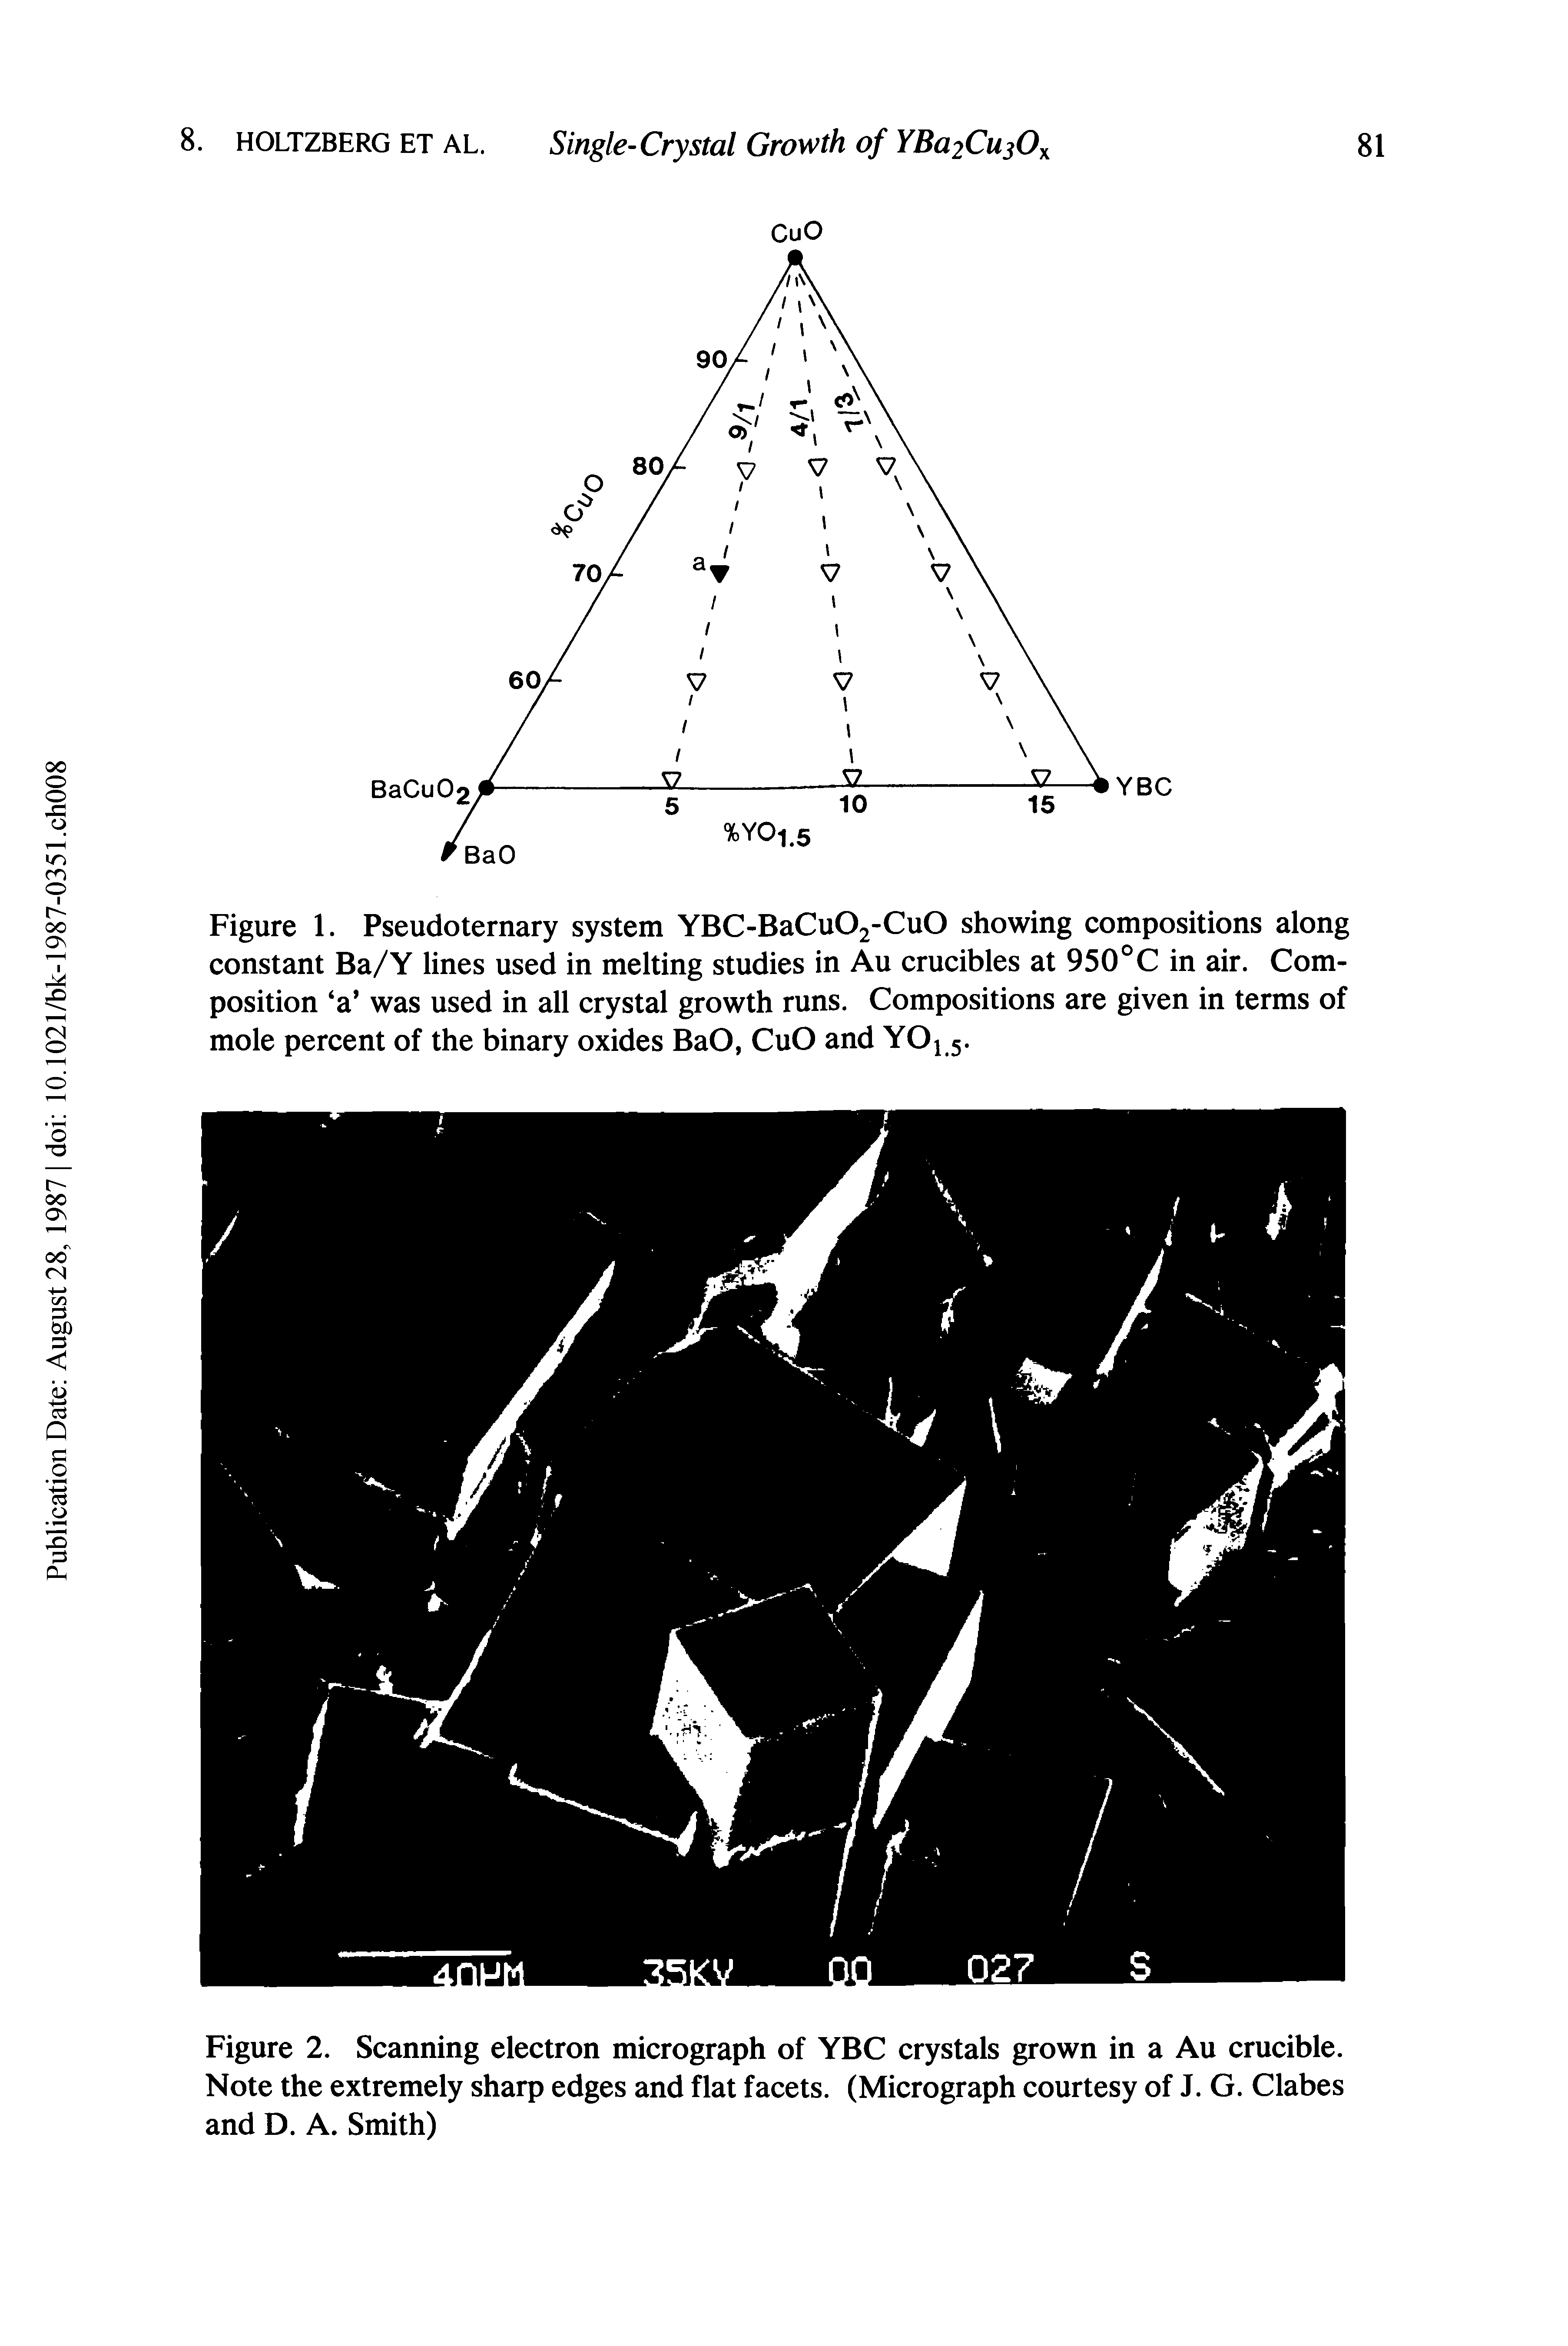 Figure 1. Pseudoternary system YBC-BaCu02-CuO showing compositions along constant Ba/Y lines used in melting studies in Au crucibles at 950°C in air. Composition a was used in all crystal growth runs. Compositions are given in terms of mole percent of the binary oxides BaO, CuO and YOj 5.